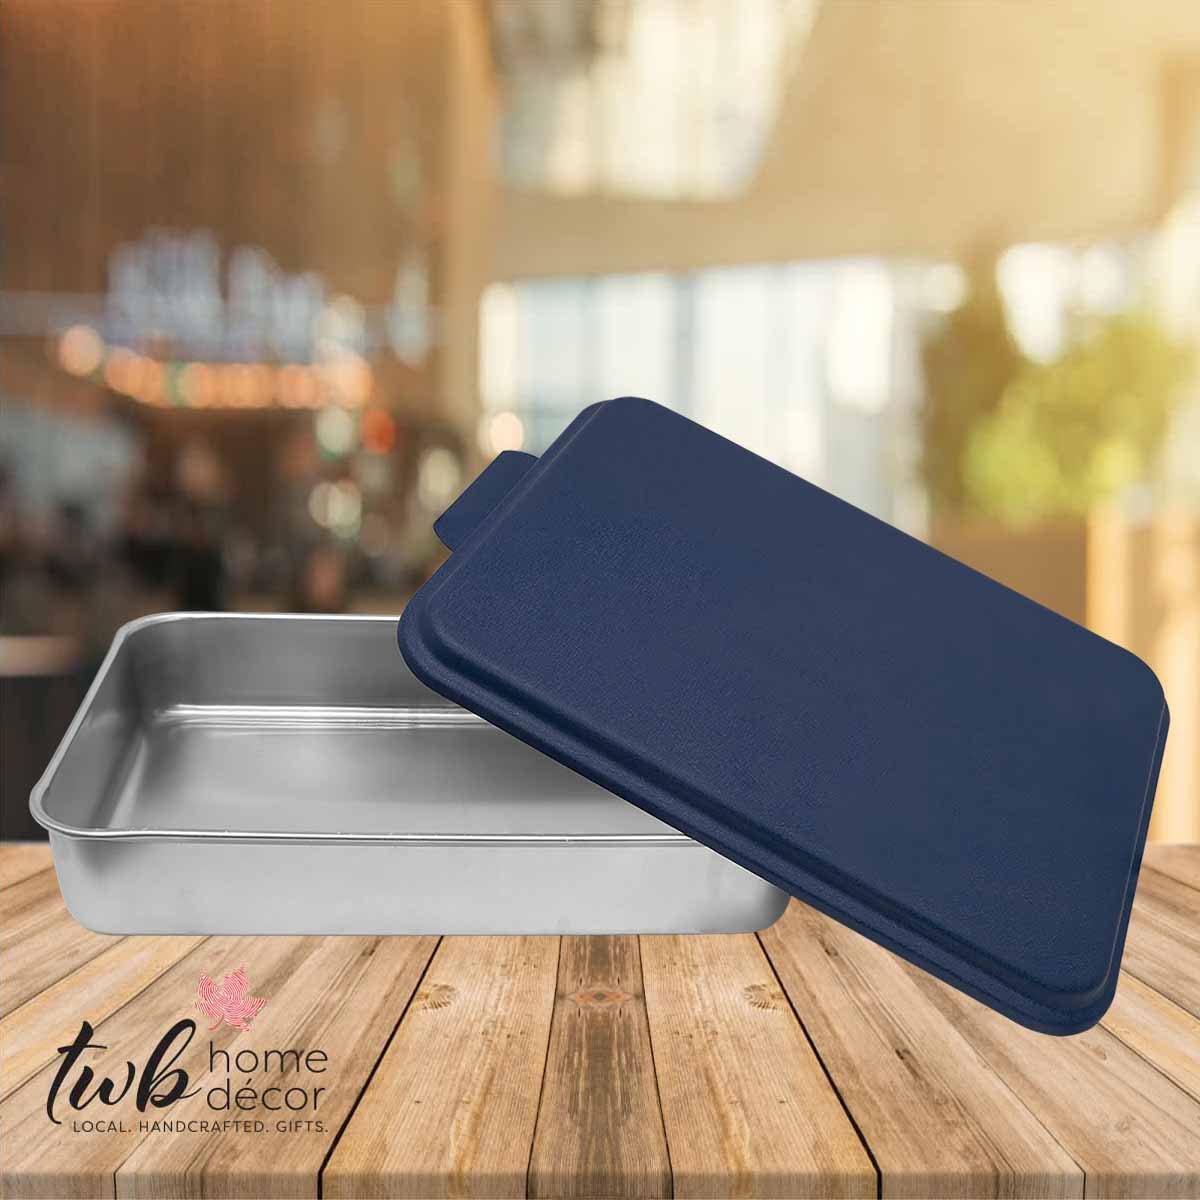 Home of Meals & Memories Cake Pan with lid - CUSTOM - TWB Home Decor